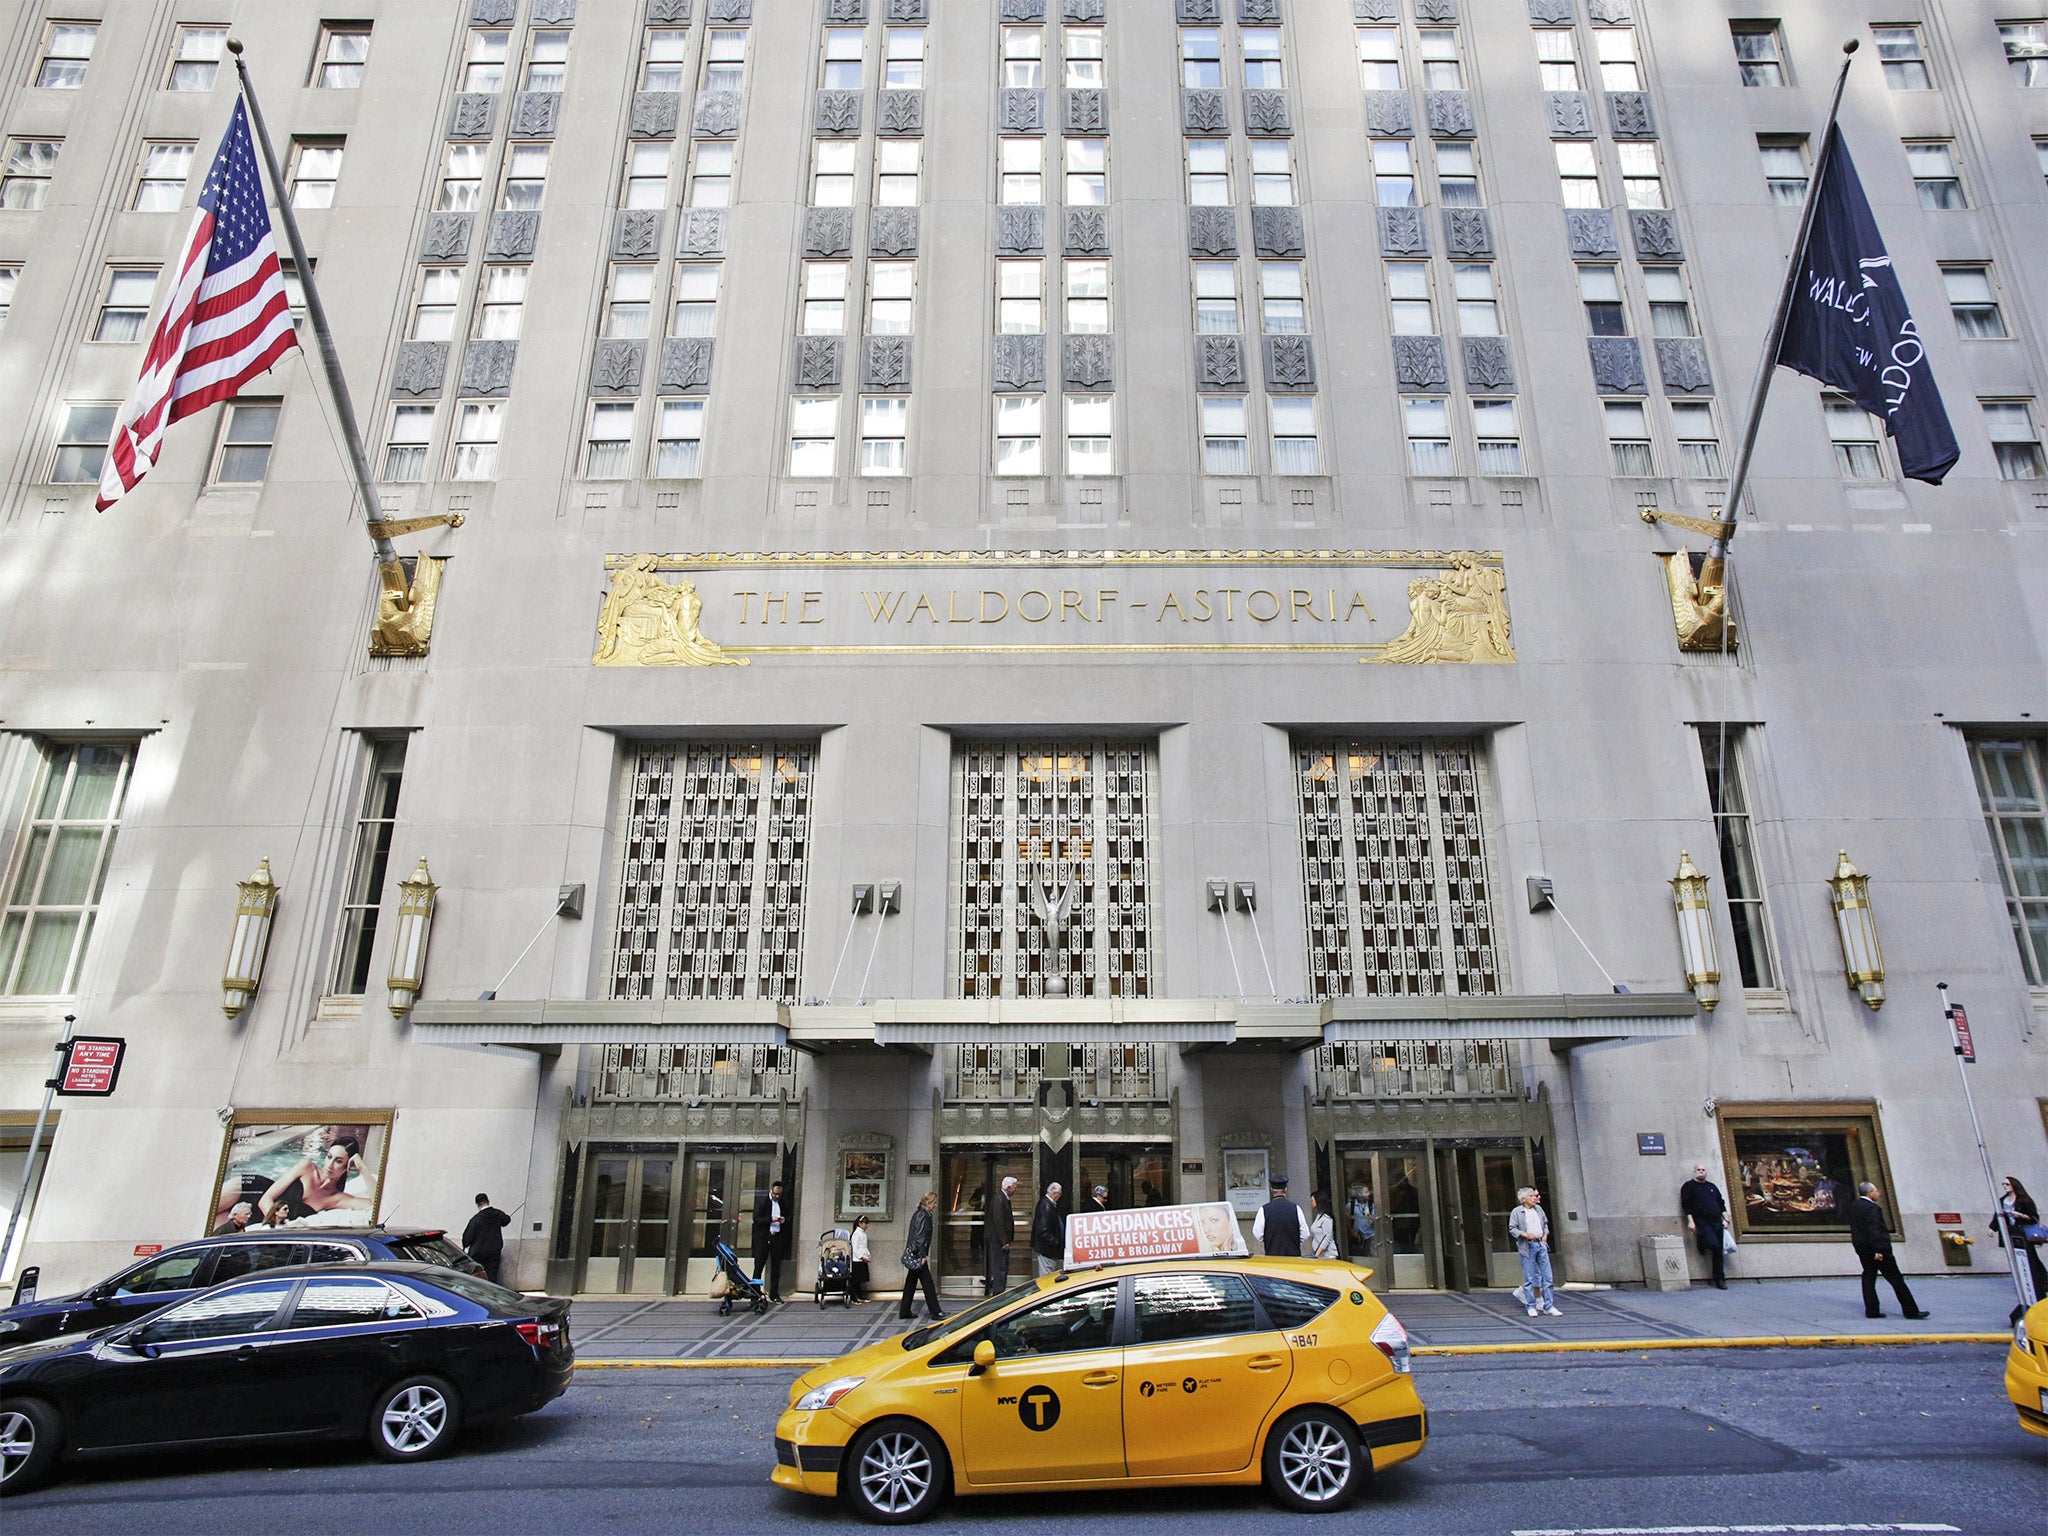 Plans to sell the Waldorf-Astoria to China’s Anbang Insurance Group pose security dilemmas